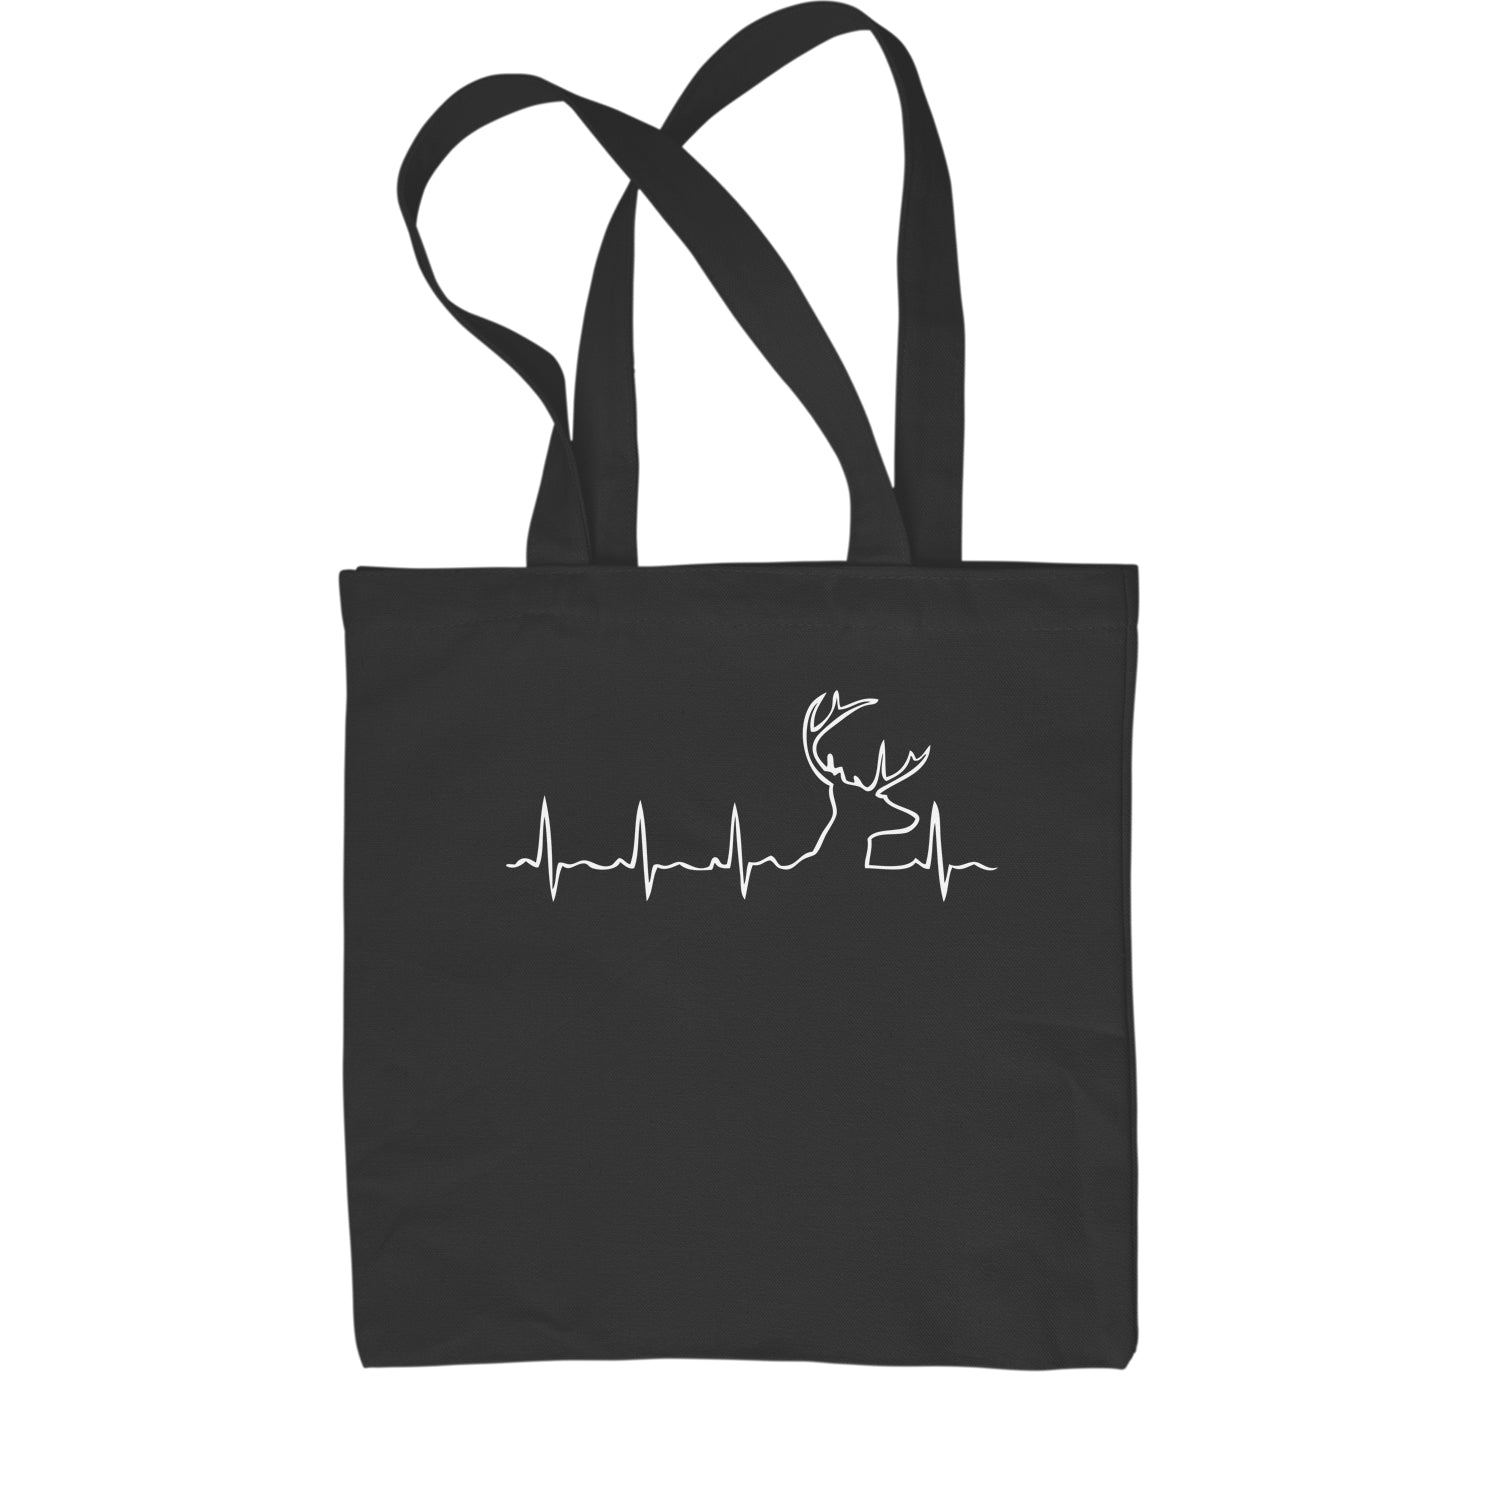 Hunting Heartbeat Dear Head Shopping Tote Bag #expressiontees by Expression Tees